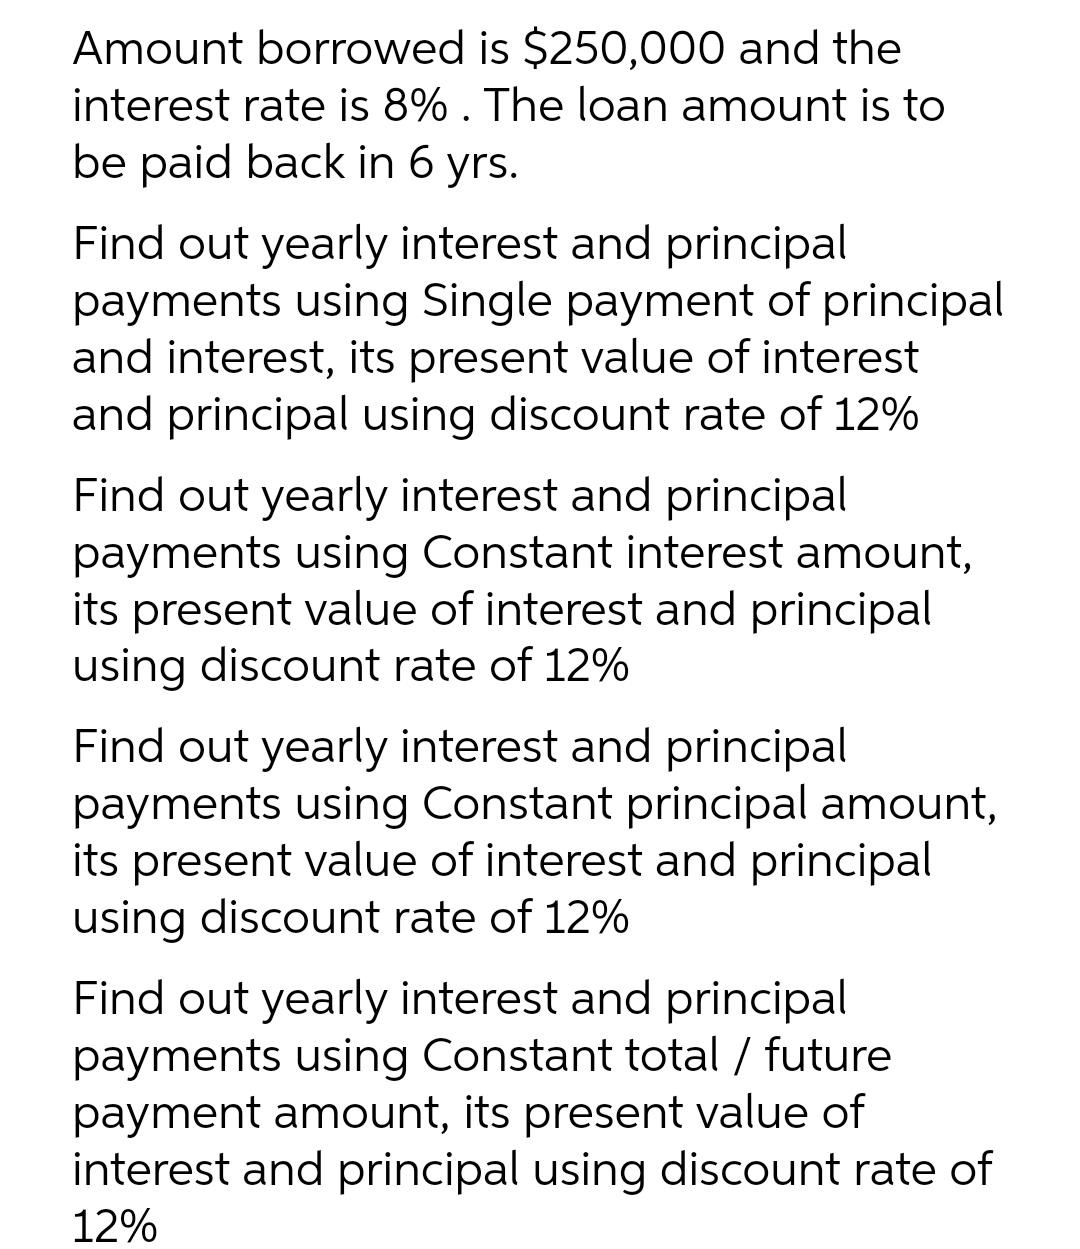 Amount borrowed is $250,000 and the
interest rate is 8% . The loan amount is to
be paid back in 6 yrs.
Find out yearly interest and principal
payments using Single payment of principal
and interest, its present value of interest
and principal using discount rate of 12%
Find out yearly interest and principal
payments using Constant interest amount,
its present value of interest and principal
using discount rate of 12%
Find out yearly interest and principal
payments using Constant principal amount,
its present value of interest and principal
using discount rate of 12%
Find out yearly interest and principal
payments using Constant total / future
payment amount, its present value of
interest and principal using discount rate of
12%
